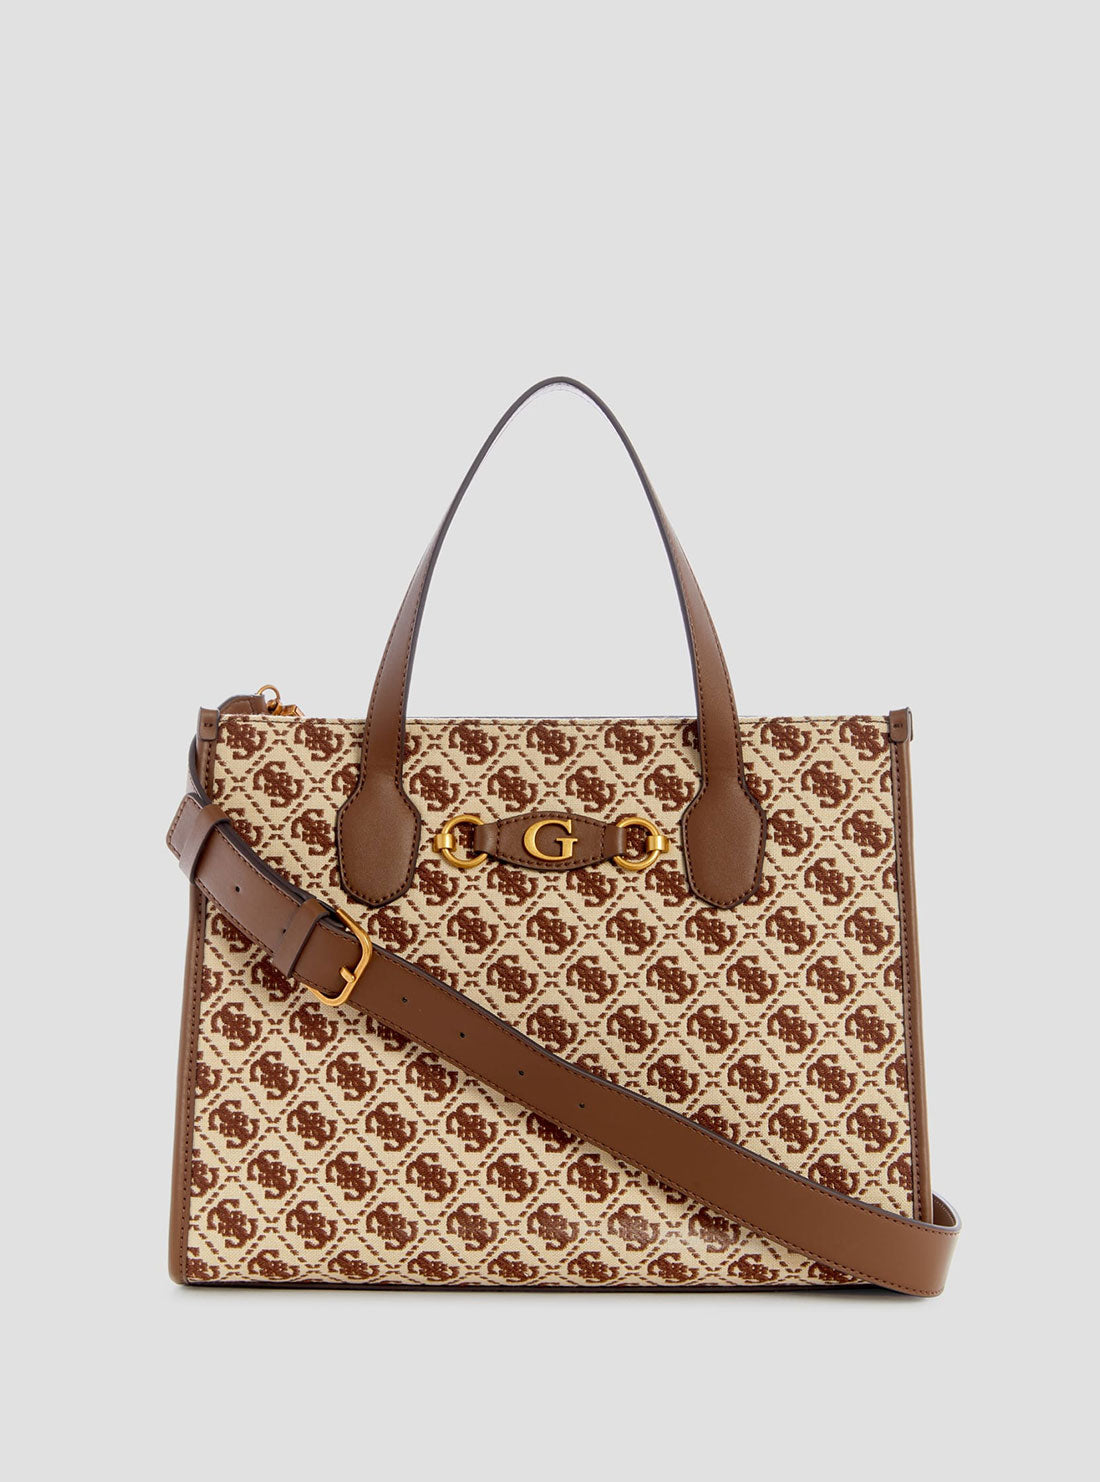 GUESS Women's Brown Logo Izzy Tote Bag JB865422 Front View